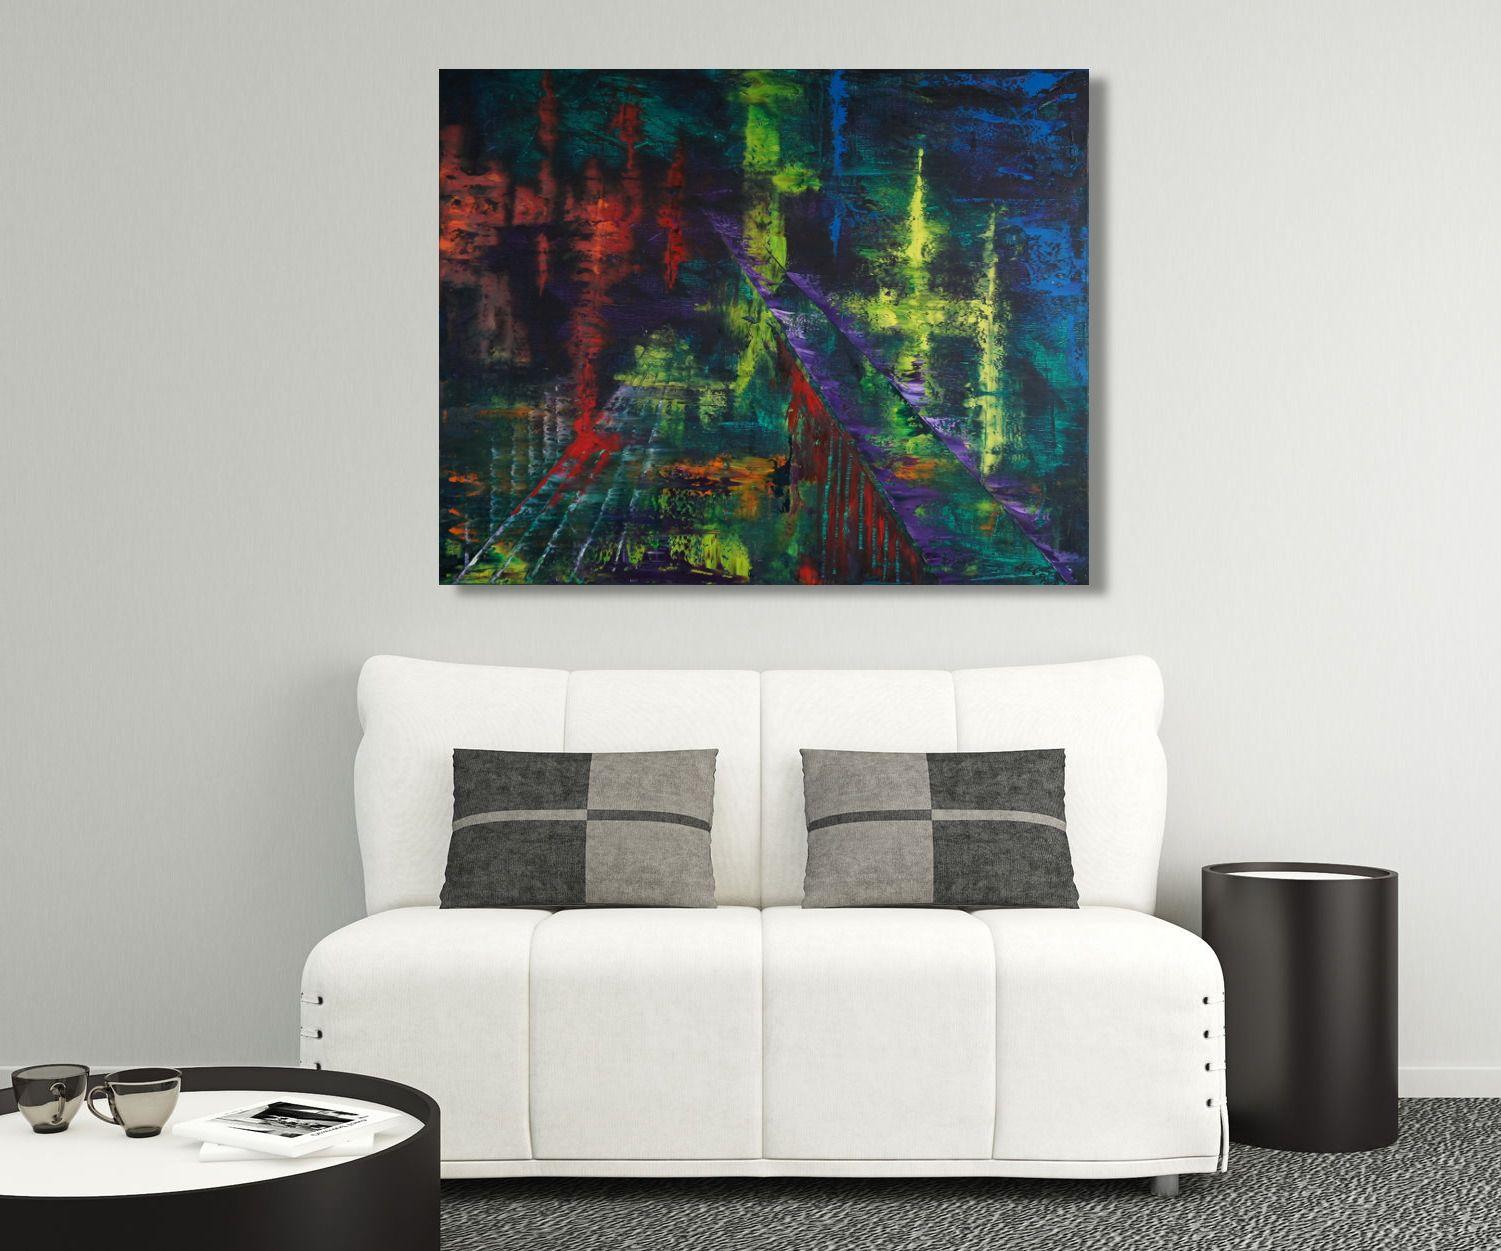 From the citylights series. Using palletknife technique and layers of oil paint to create an abstracted city night scene.    Unique painting using high-quality oil colors on gallery canvas (stapled on the back), glossy varnish to seal the painting.